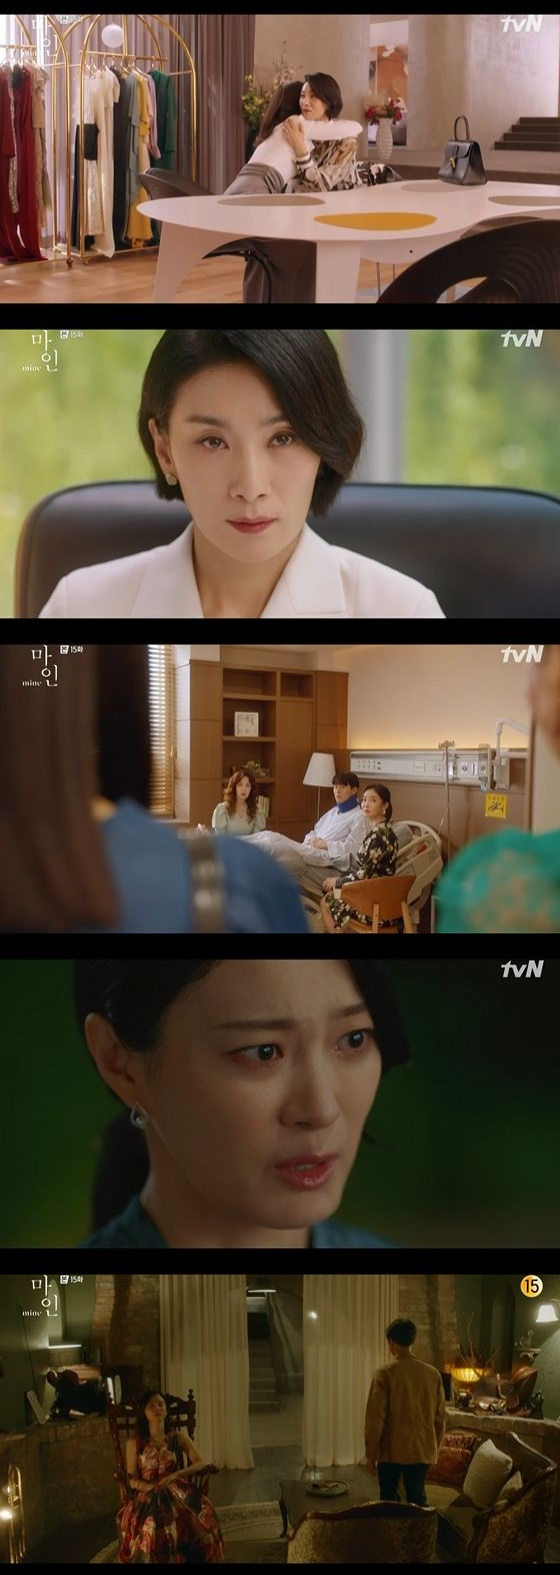 In TVNs Saturday Drama Mine, which was broadcast on the afternoon of the 26th, the death of Han Ji-yong (Lee Hyeonwuk) and the image of Hyowon family surrounding the loss of Memory of Lee Bo-young (Lee Bo-young).A day before Han Ji-yongs death, Han Ji-yong warned Jeong Jeong-hyeon (Kim Seo-hyung) and Seo Hee-soo in turn, saying, I never die alone; both Hyowon and Ha Jun-i are mine.In the meantime, Seo Hee-soo was told by Han Ji-yong that Jeong Seo-hyun was a minor minority. Seo Hee-soo cheered on Jeong Seo-hyun, saying, Someone is on your side.After Han Ji-yongs death, Jeong Jeong-hyun was investigated by the police. Jeong Jeong-hyun asked Detective (Choi Young-joon), who asked Seo Hee-soo for the truth of the day he witnessed on the stairs, Han Ji-yong was in the corner.I do not think it is convincing that Han Ji-yong killed himself. Han Ji-yong insisted that he made an extreme choice himself.Yang Soon-hye (Park Won-sook) spent time with the peacock Nodeok as if he had no appetite for Han Ji-yongs death.Also, a chairman (Jeong Dong-hwan) looked at the picture of Han Ji-yong, who died, and said, Im sorry, I will be born as my real son in the next life.Han Jin-hee (played by Kim Hye-hwa) also found out that her husband, Park Jeong-do (played by Cho Eun-sol), who was in a traffic accident, was secretly meeting with Jasmine (played by Yoon Ji), a member of the prayer party.Han Jin-hee, who faced Jasmine in the hospital, argued with Jasmine, saying, Ill meet your husband, my husband you live with him.Lee Hye-jin (Ok Ja-yeon) found out that Seo Hee-soo had returned to Memory and that Han Ji-yong had been taking sleeping pills. Lee Hye-jin said, I dont care if you killed him.I just want to know the last, said Seo Hee-soo as a criminal.Detective found out about the existence of a bunker in the basement of Hyowon family. Detective, who came to the bunker late at night, met Seo Hee-soo.Detective said, Seo Hee-soo, you are all Memory, right? Everyone in this family is trying to kill Han Ji-yong. You killed Han Ji-yong?In a Detective inquiry, Seo Hee-soo said, Yes, I killed him. I think I killed him, but what if I can not remember anything?, and heightened tension about the whole event.